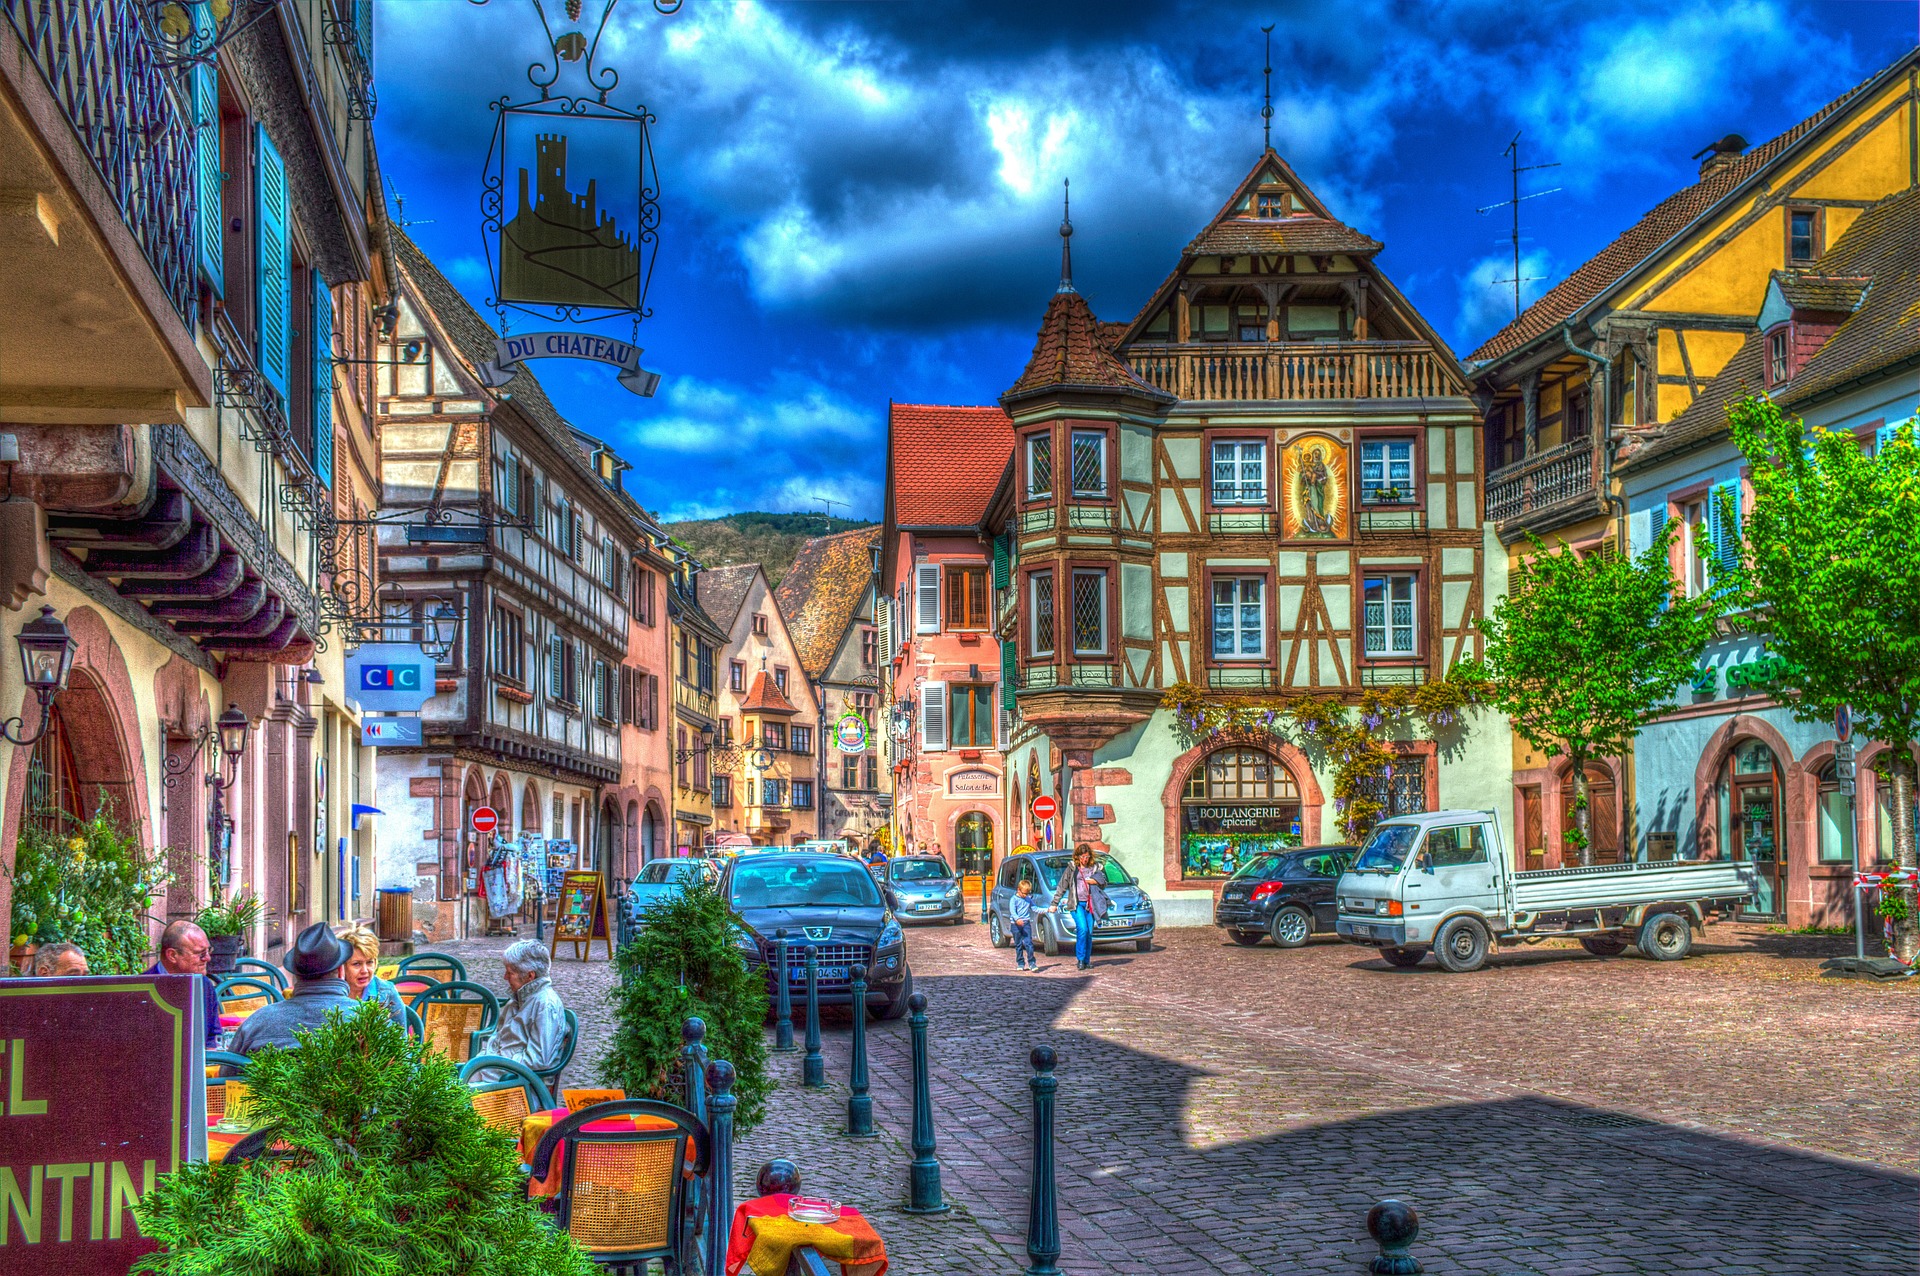 DY- Alsace, France, wallpaper download